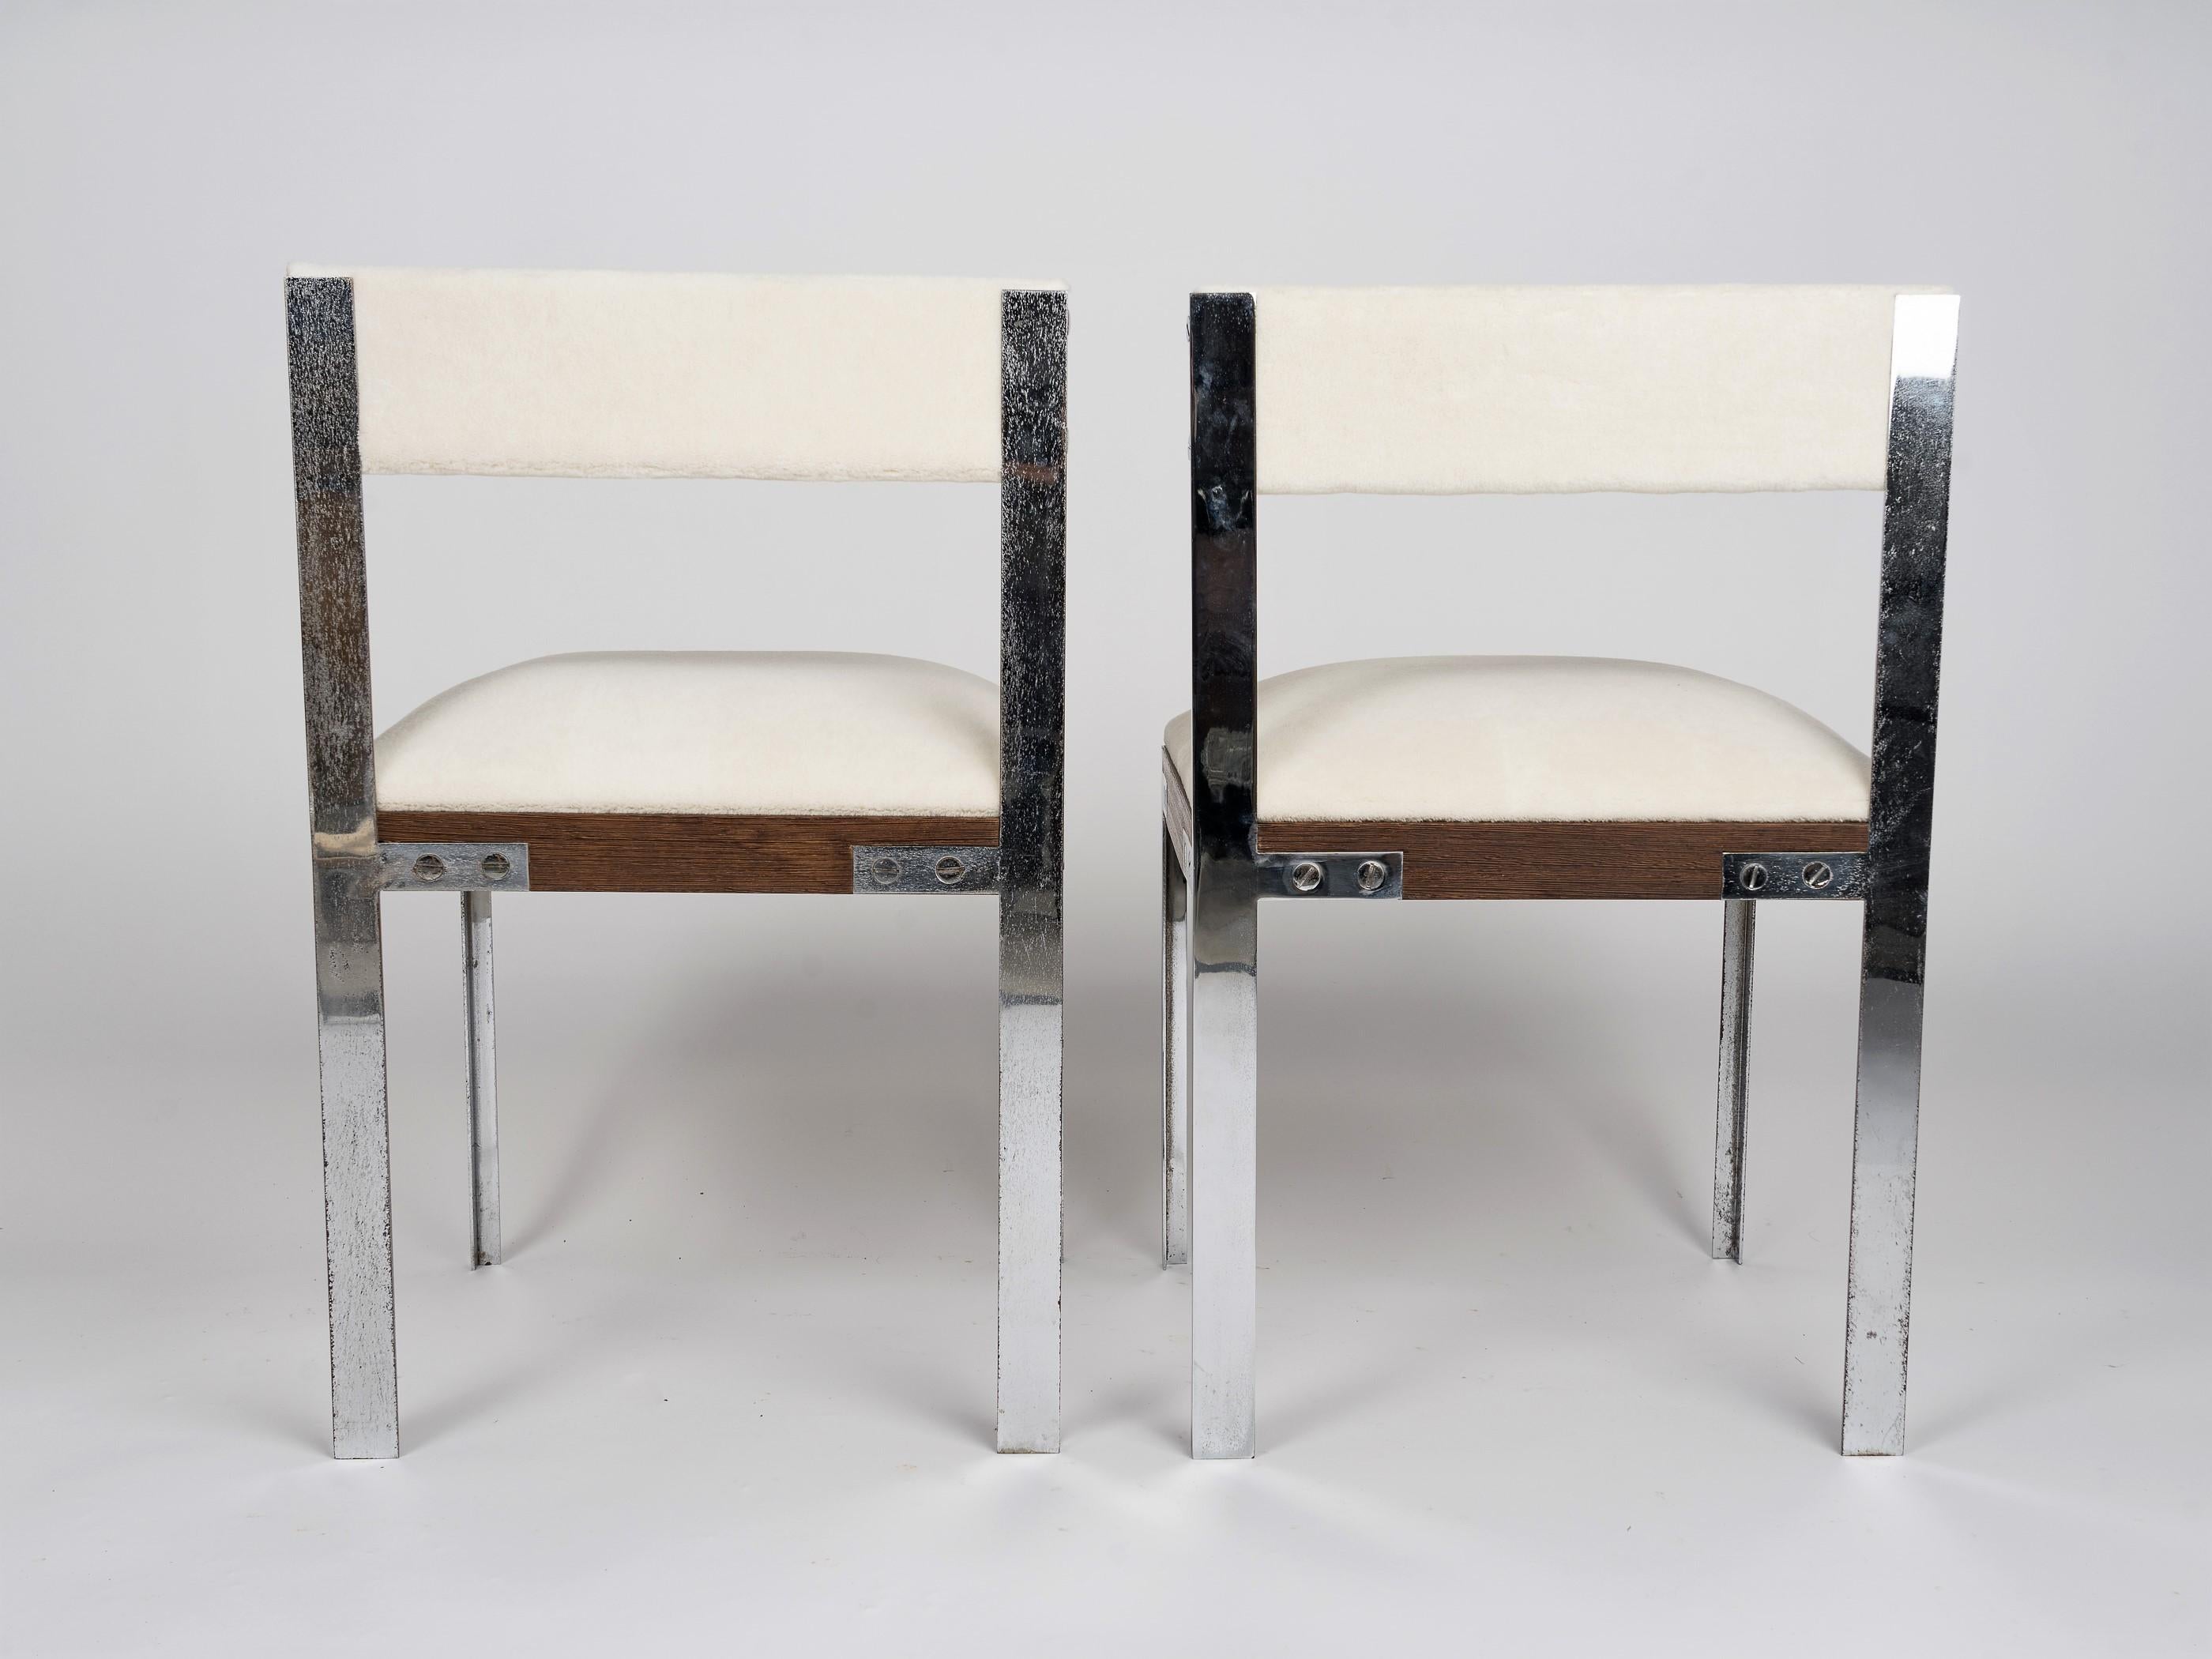 Rarest pair of Hubert Nicolas chairs in Palmwood and chrome. Freshly re-upholstered with Bisson Bruneel Alpaga fabric. Please see pictures and condition comments below.
This item will ship from Paris and can be returned to either France or to a NY